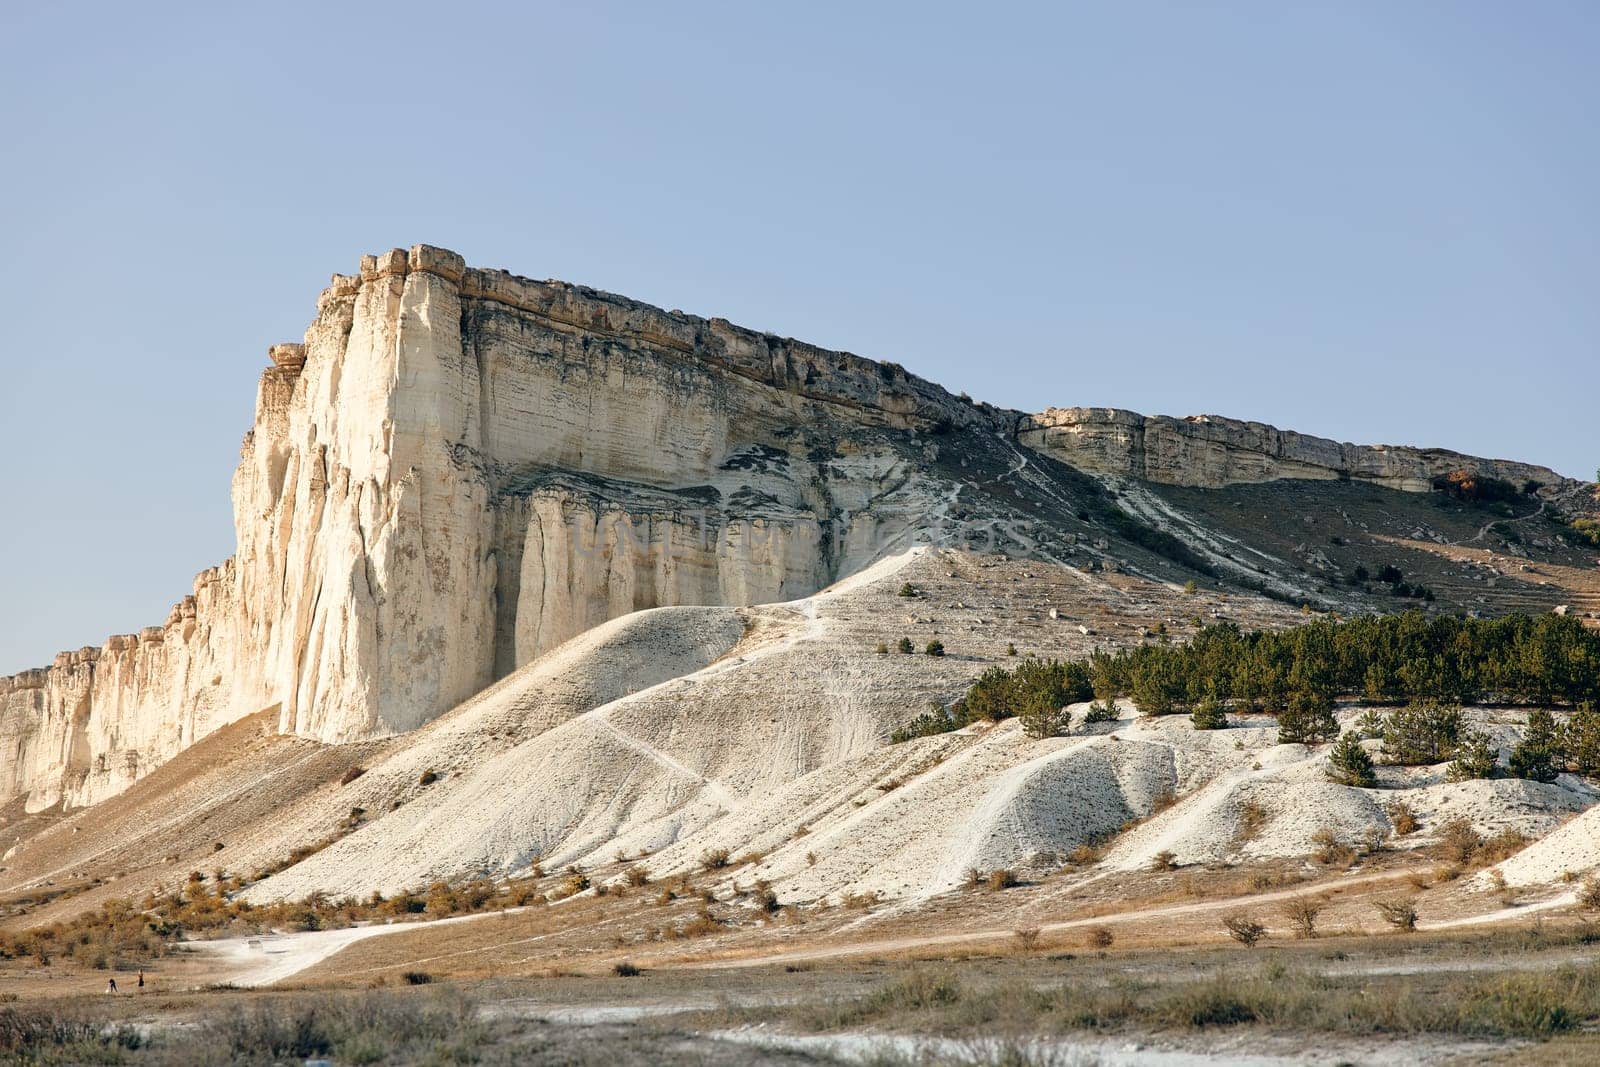 Majestic white rock formation standing tall in open field with scattered trees in the distance